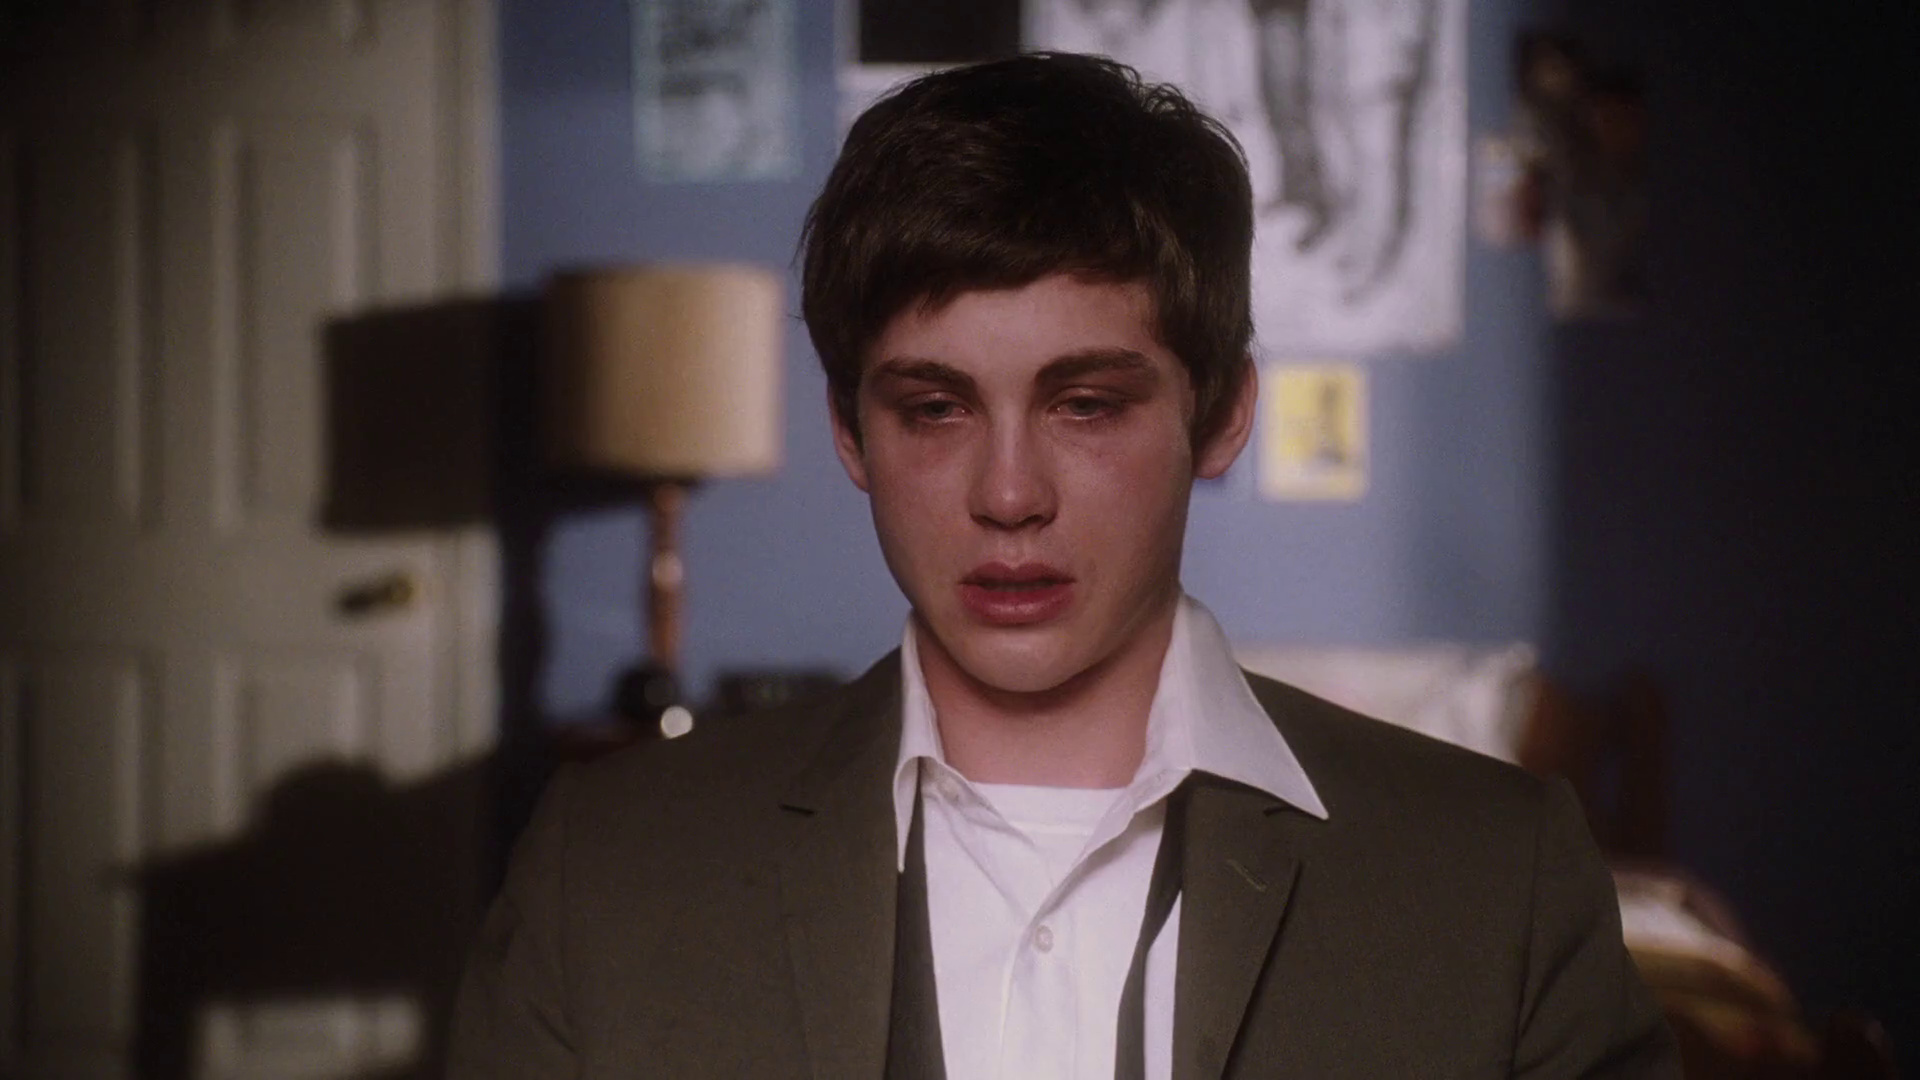 Perks of Being a Wallflower, Movie review, Viewer's commentary, Critic's perspective, 1920x1080 Full HD Desktop